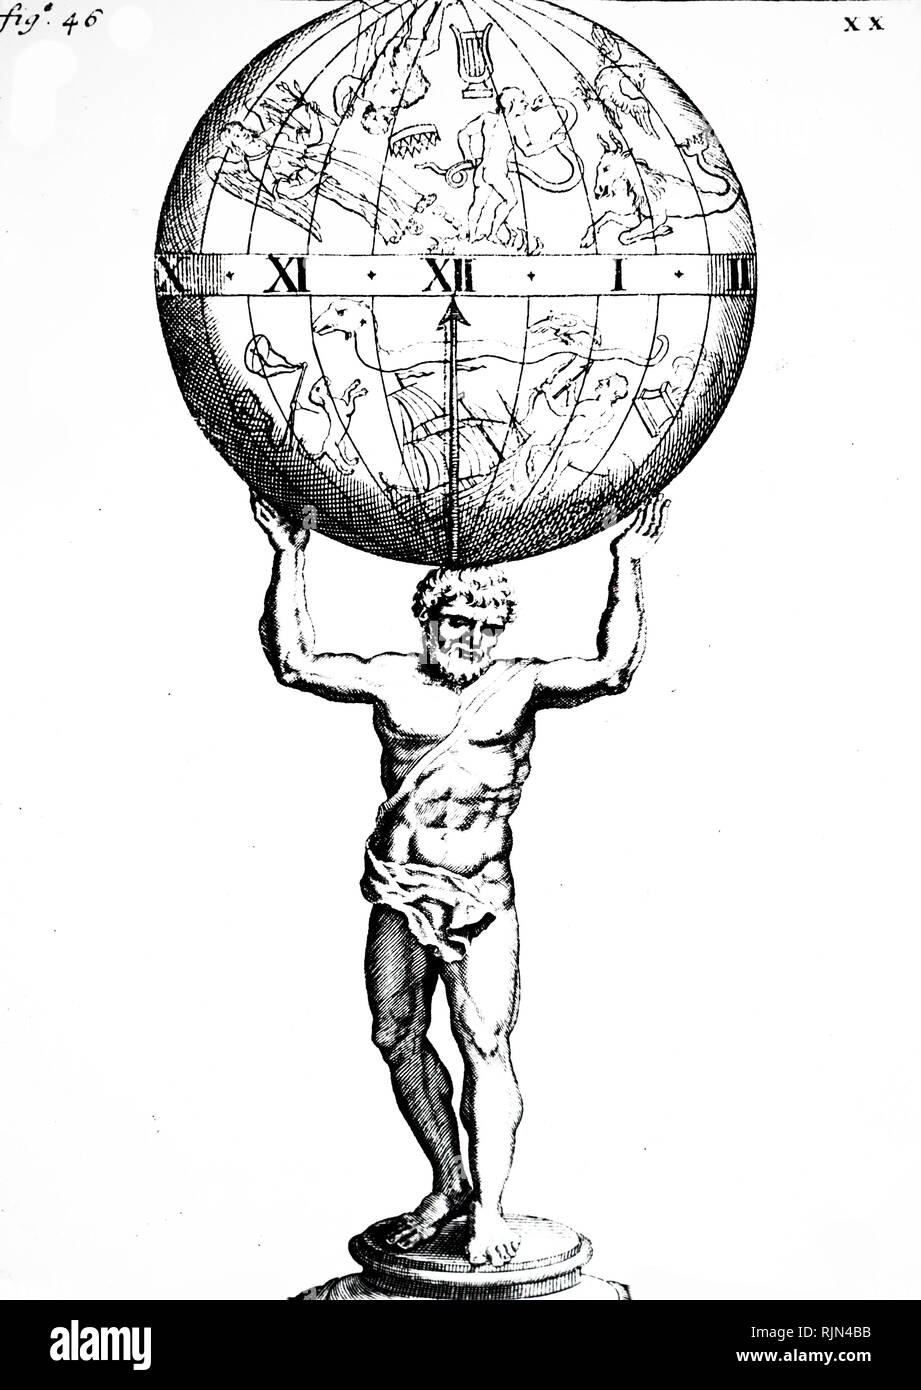 Atlas Holding World On His Shoulders Spaceship Flying Around World